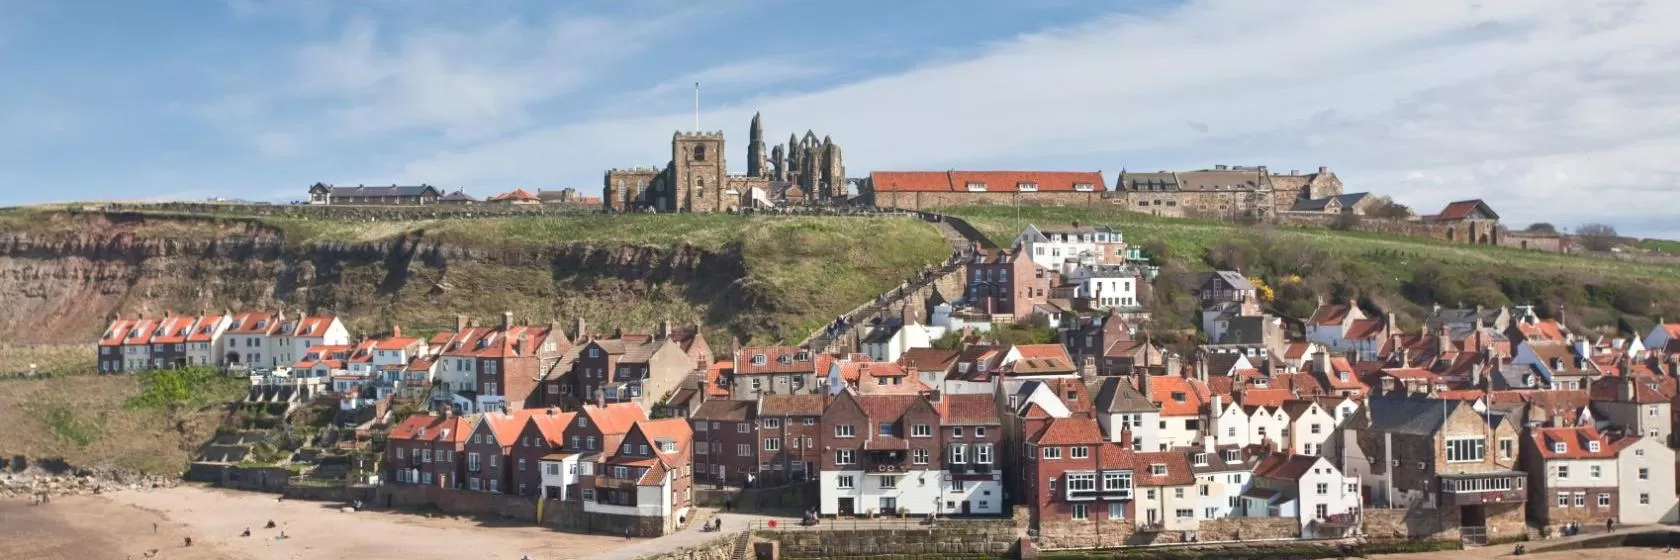 Whitby, North Yorkshire Hotels